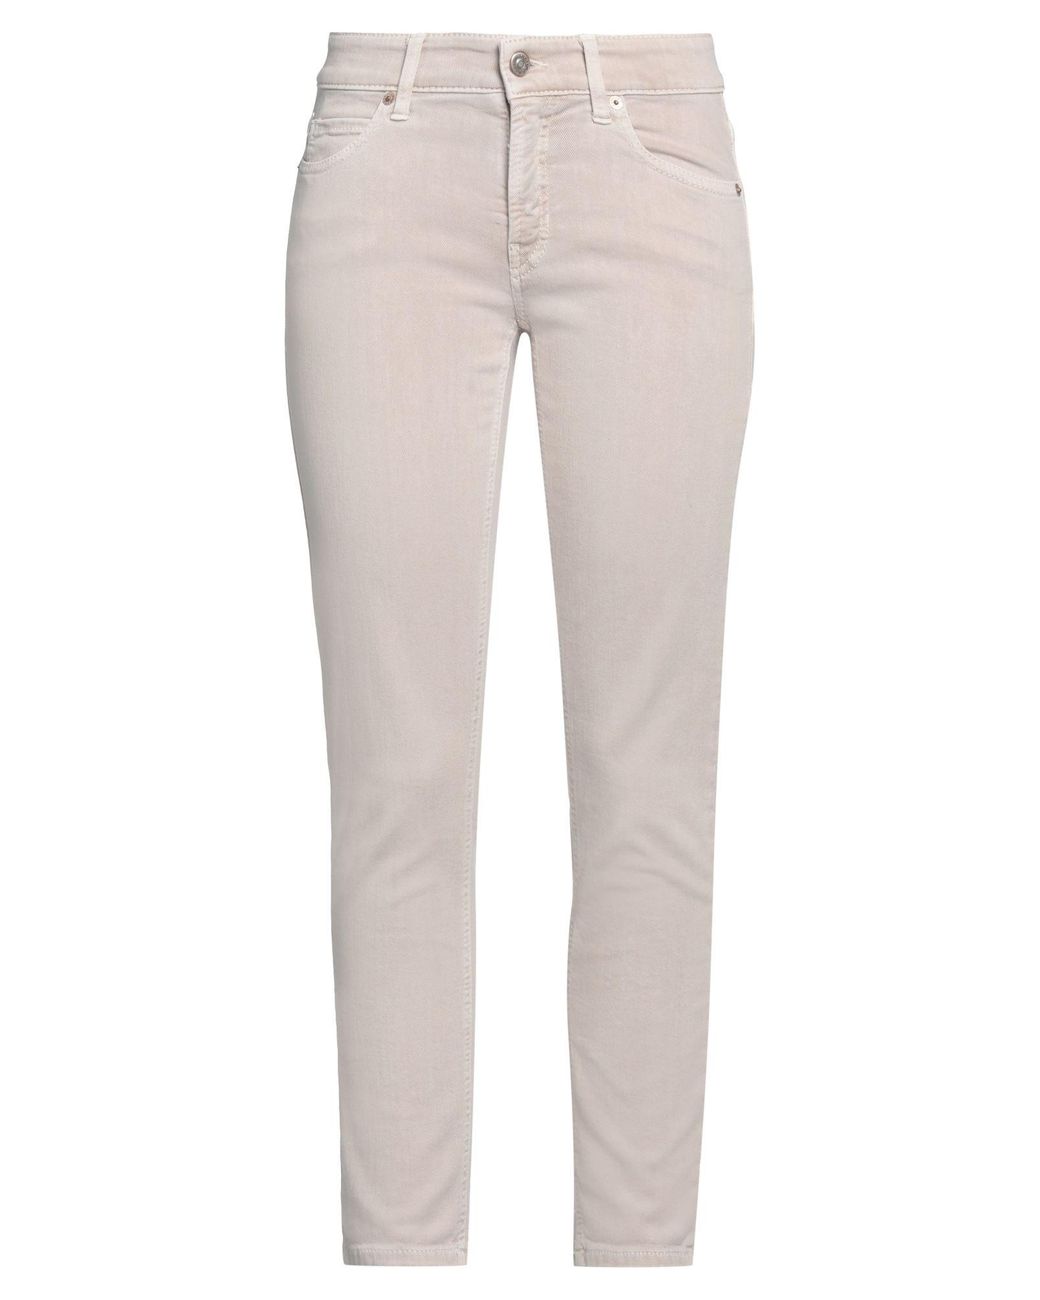 Cambio Denim Pants in White | Lyst